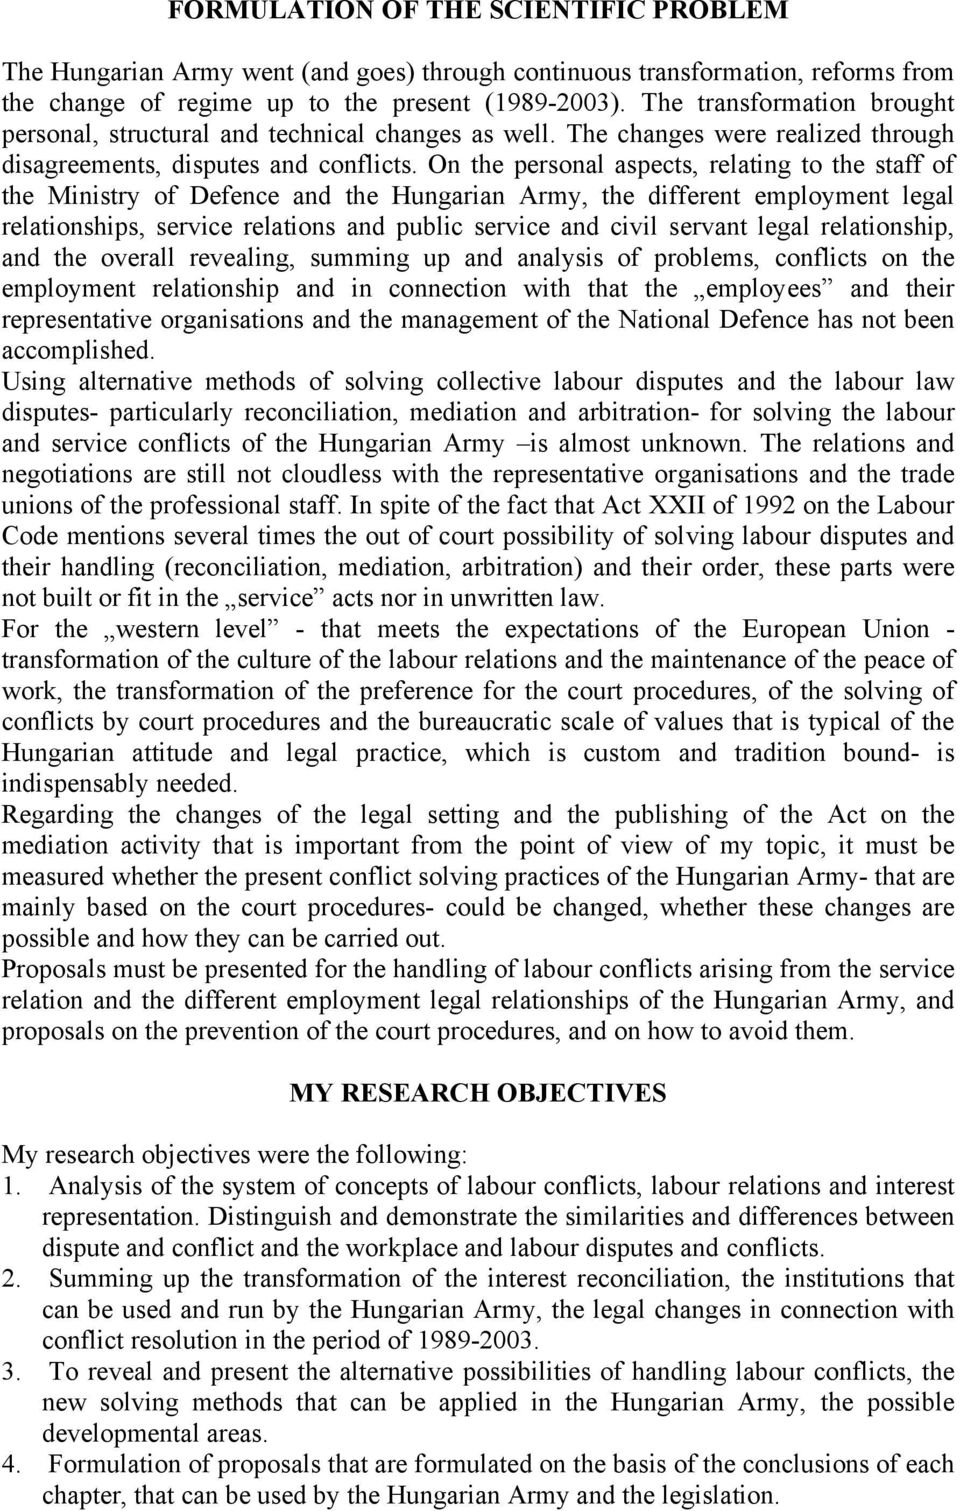 On the personal aspects, relating to the staff of the Ministry of Defence and the Hungarian Army, the different employment legal relationships, service relations and public service and civil servant